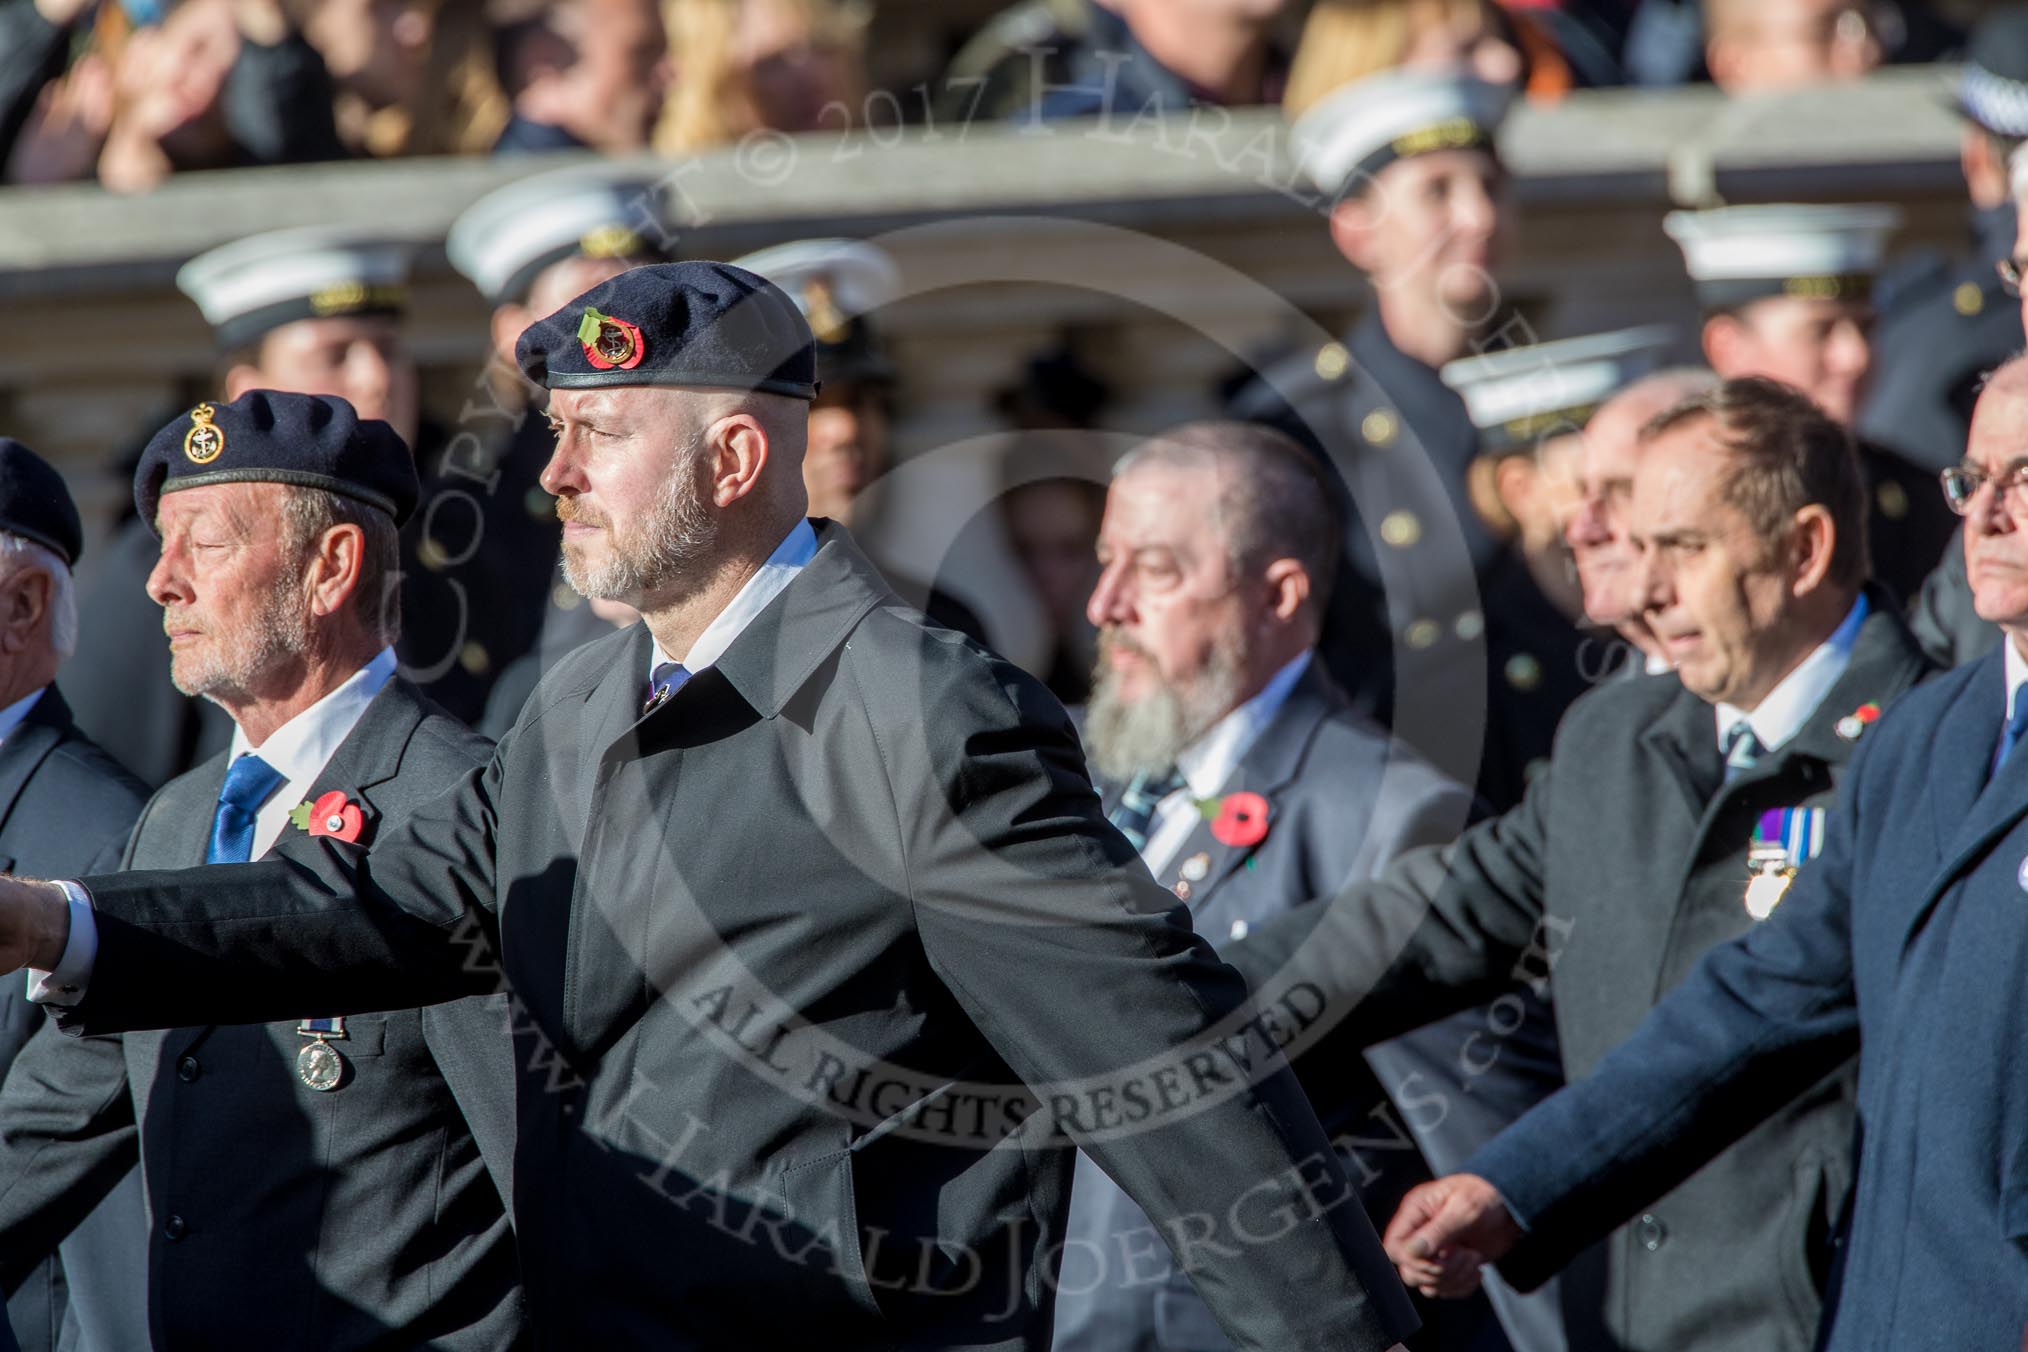 Royal Navy Photographers Association  (Part of the Fly Navy Federation conti (Group E13, 23 members) during the Royal British Legion March Past on Remembrance Sunday at the Cenotaph, Whitehall, Westminster, London, 11 November 2018, 11:43.